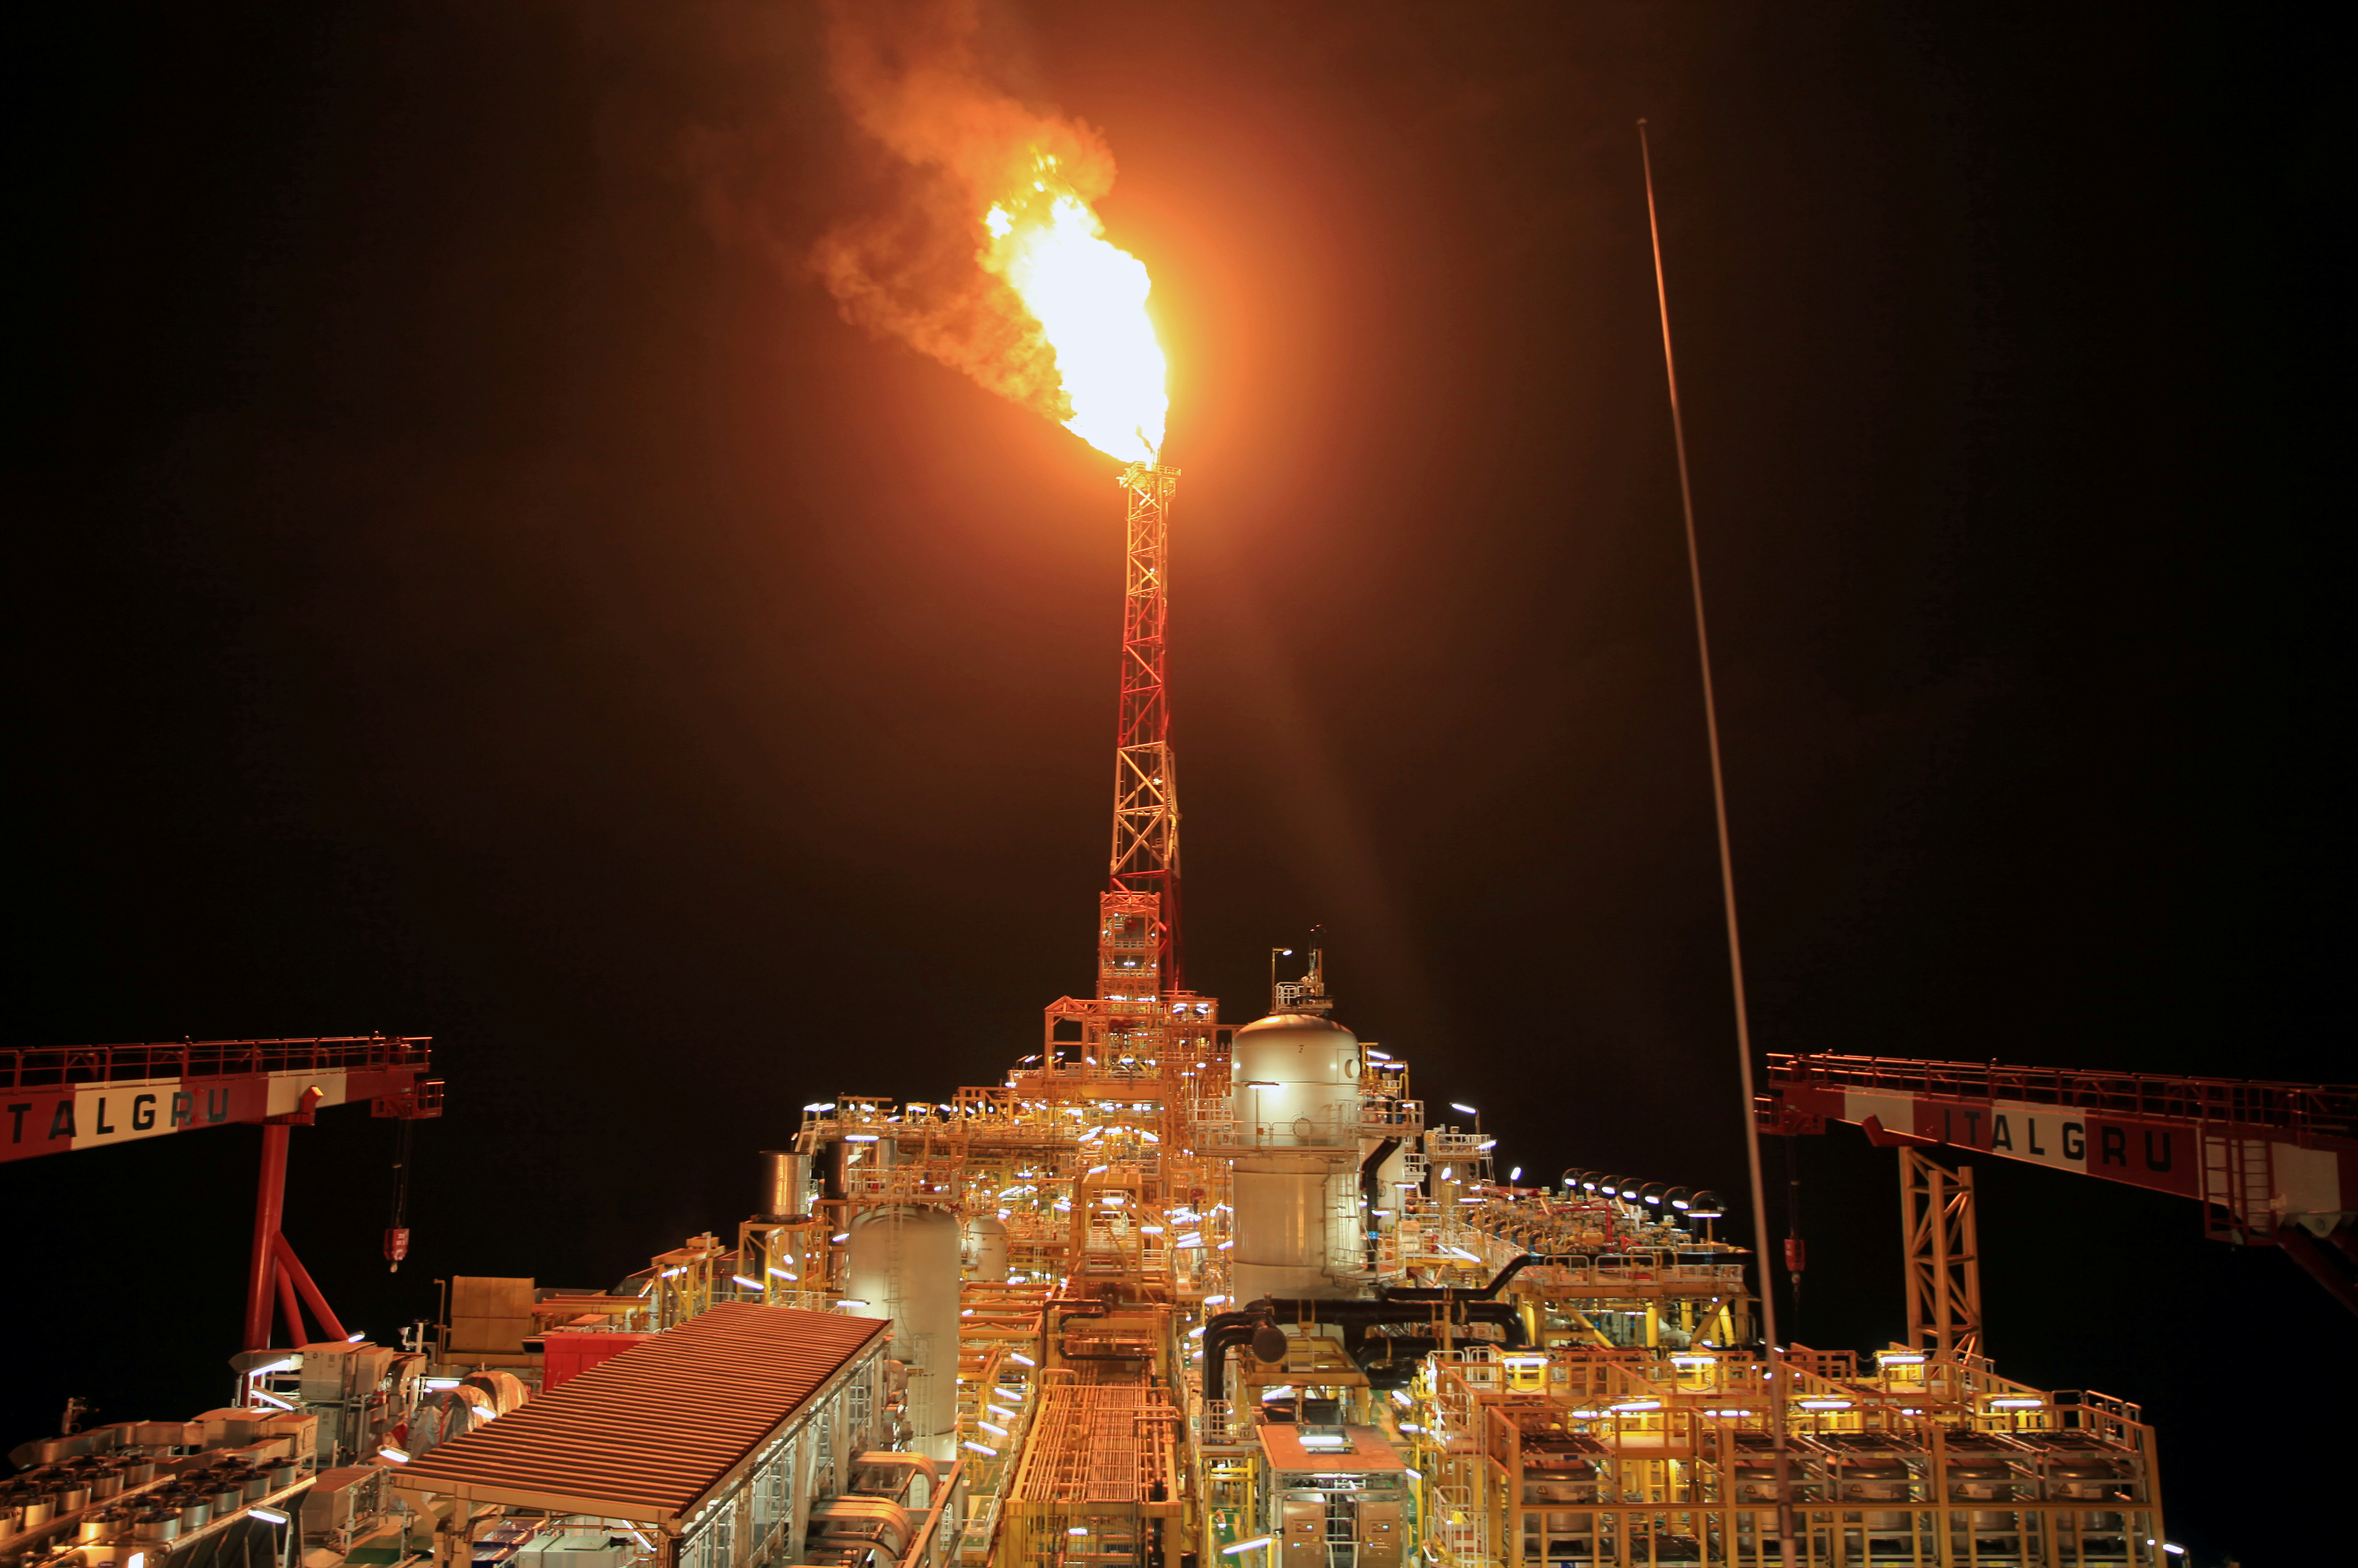 Kaombo Norte floating oil platform is seen at night off the coast of Angola